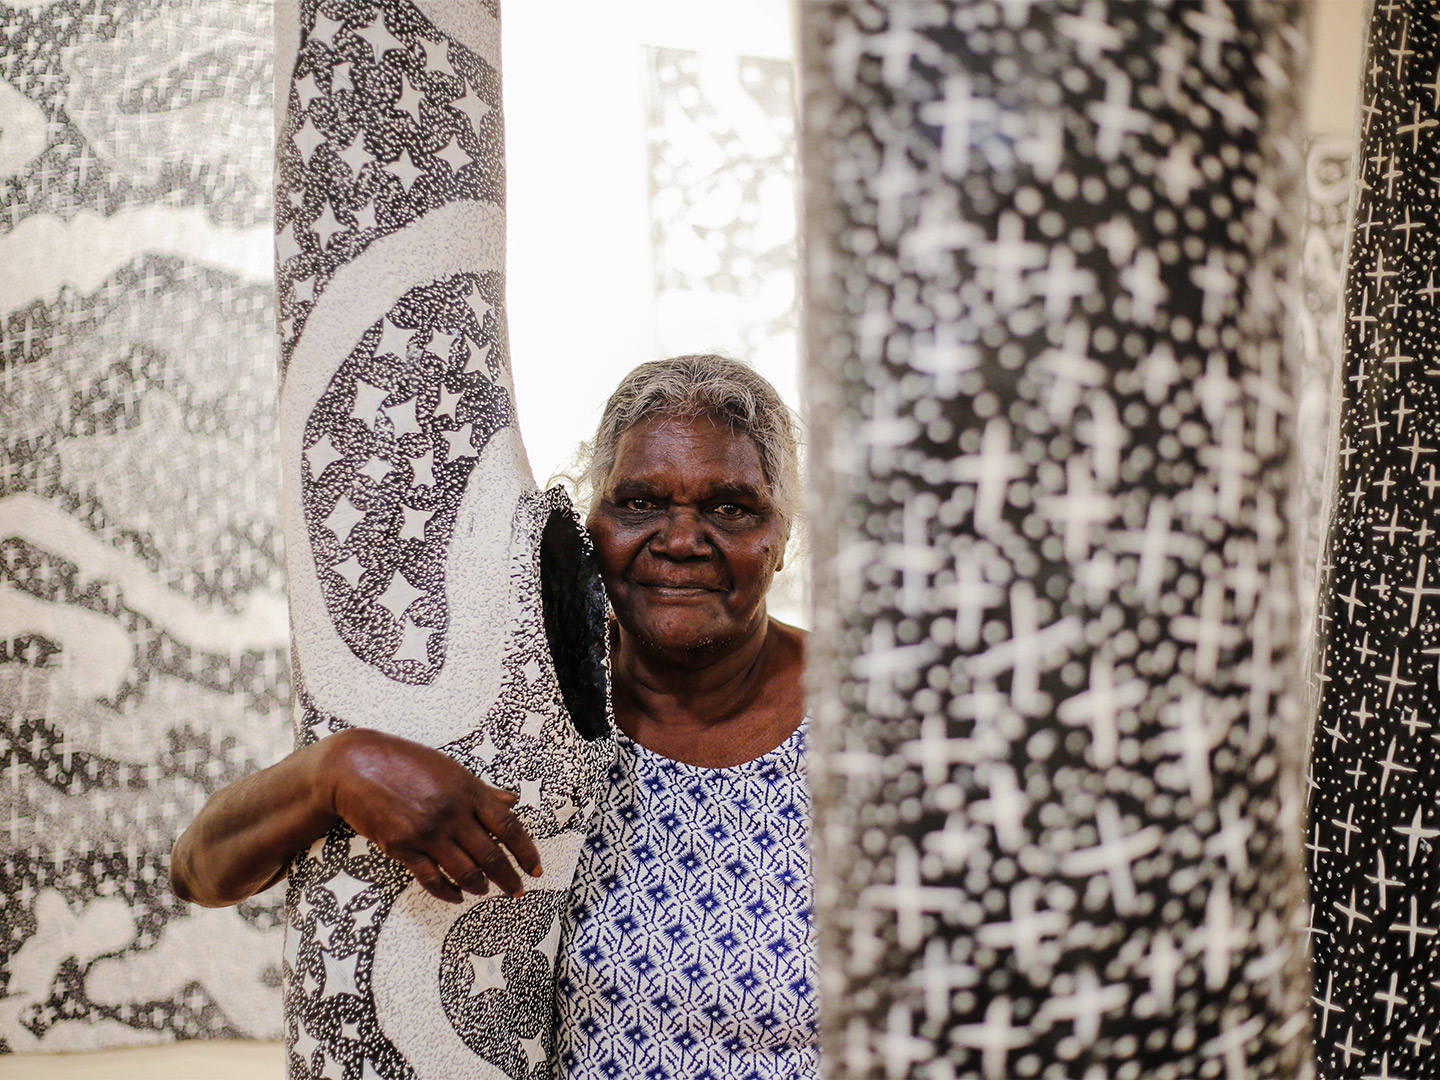 Featuring the work of 11 Yolŋu women artists of north-east Arnhem Land, the 'Bark Ladies' exhibition opens at the NGV this December. 